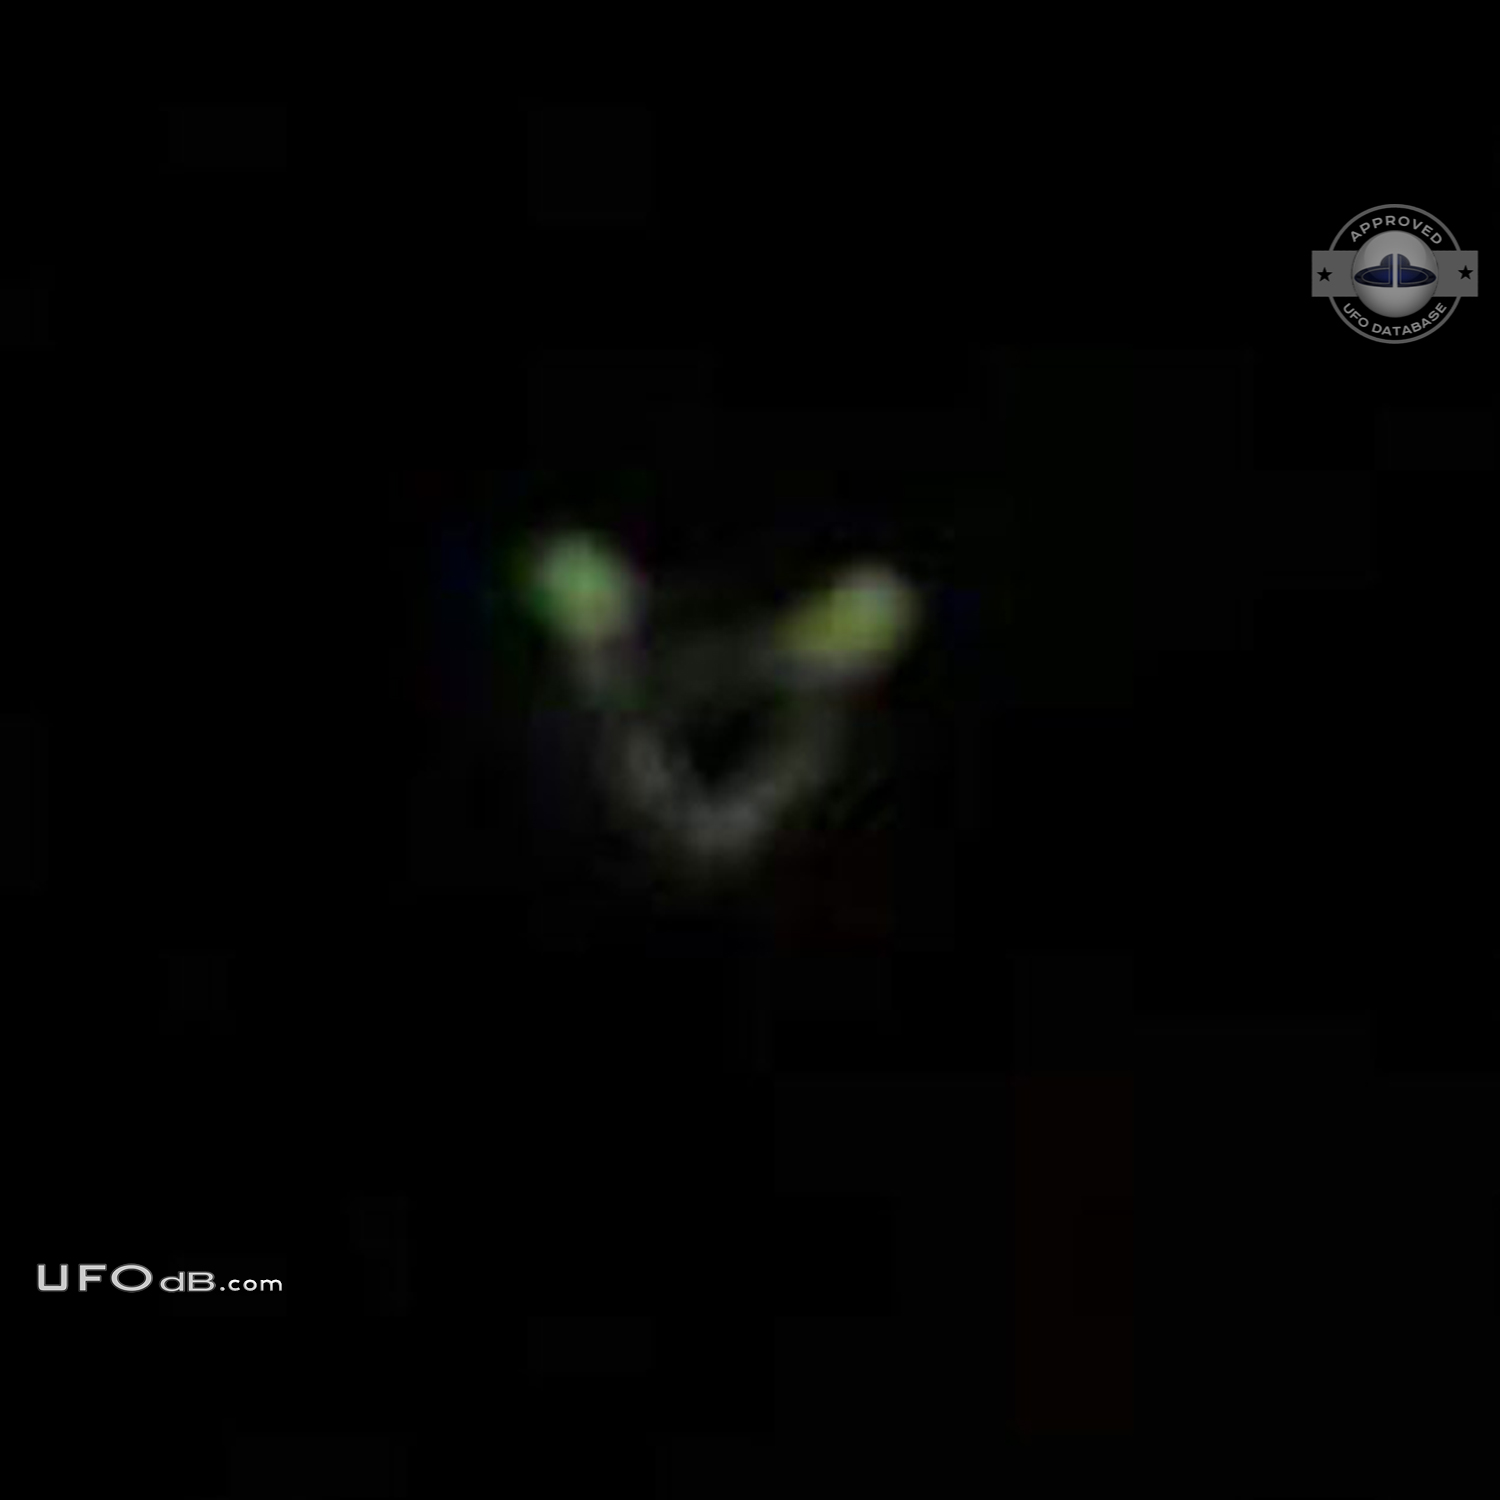 Silent UFO seen near woodland area Huddersfield UK on May 2011 UFO Picture #641-3